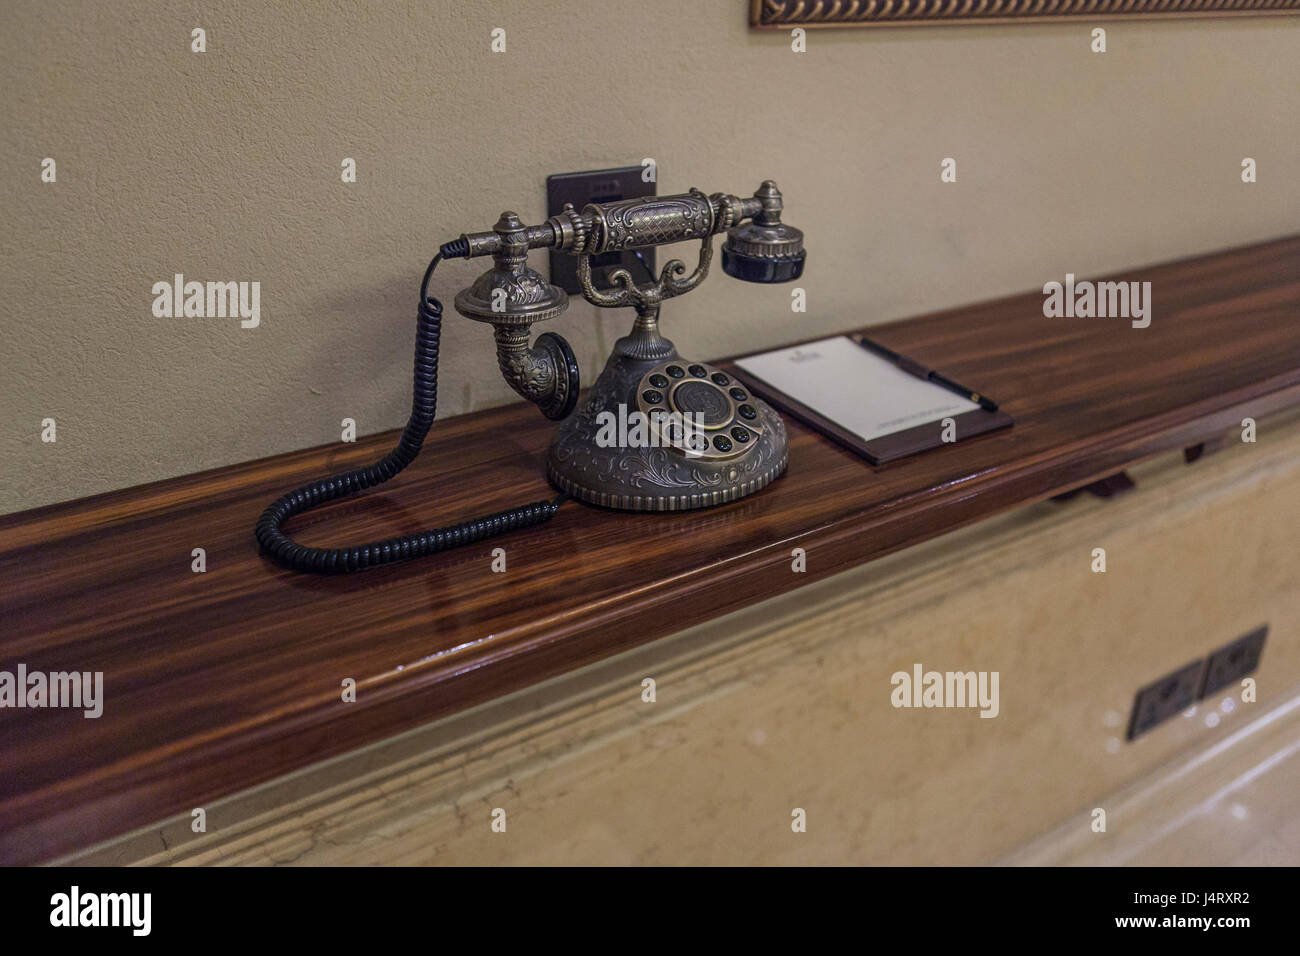 ornate, decorative telephone but also functional and operational Stock Photo